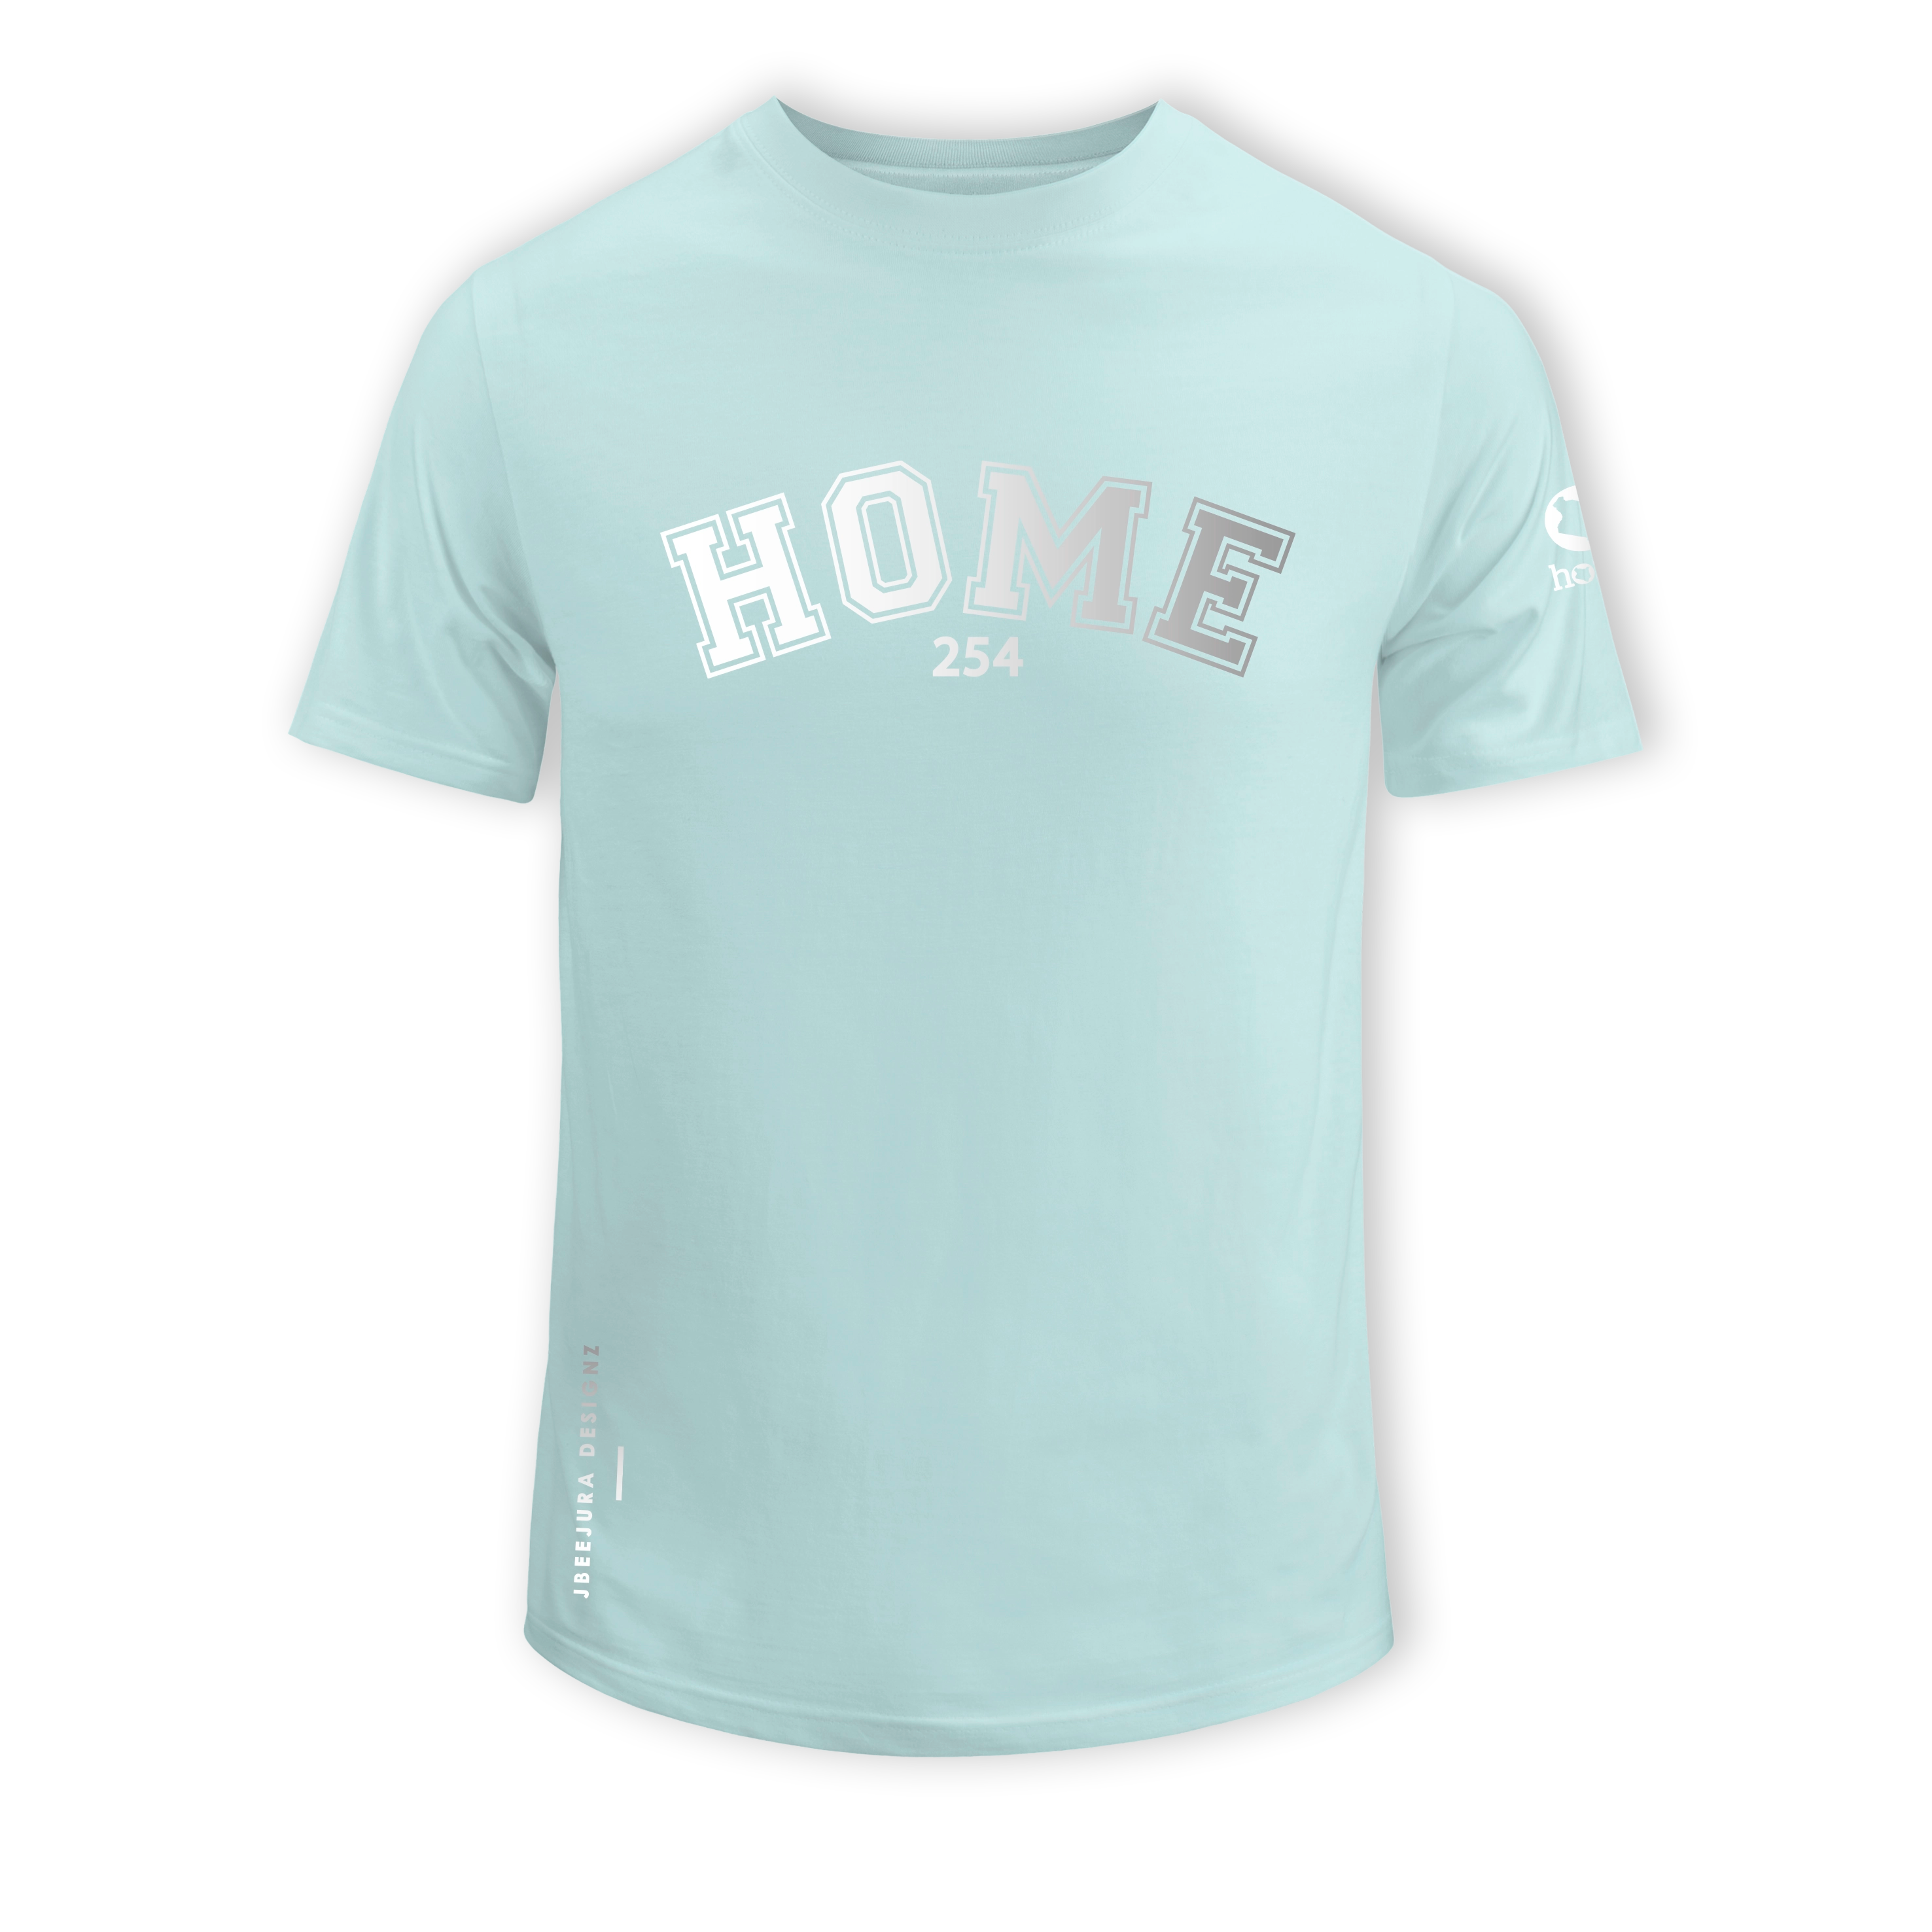 home_254 SHORT-SLEEVED MISTY BLUE T-SHIRT WITH A SILVER COLLEGE PRINT – COTTON PLUS FABRIC